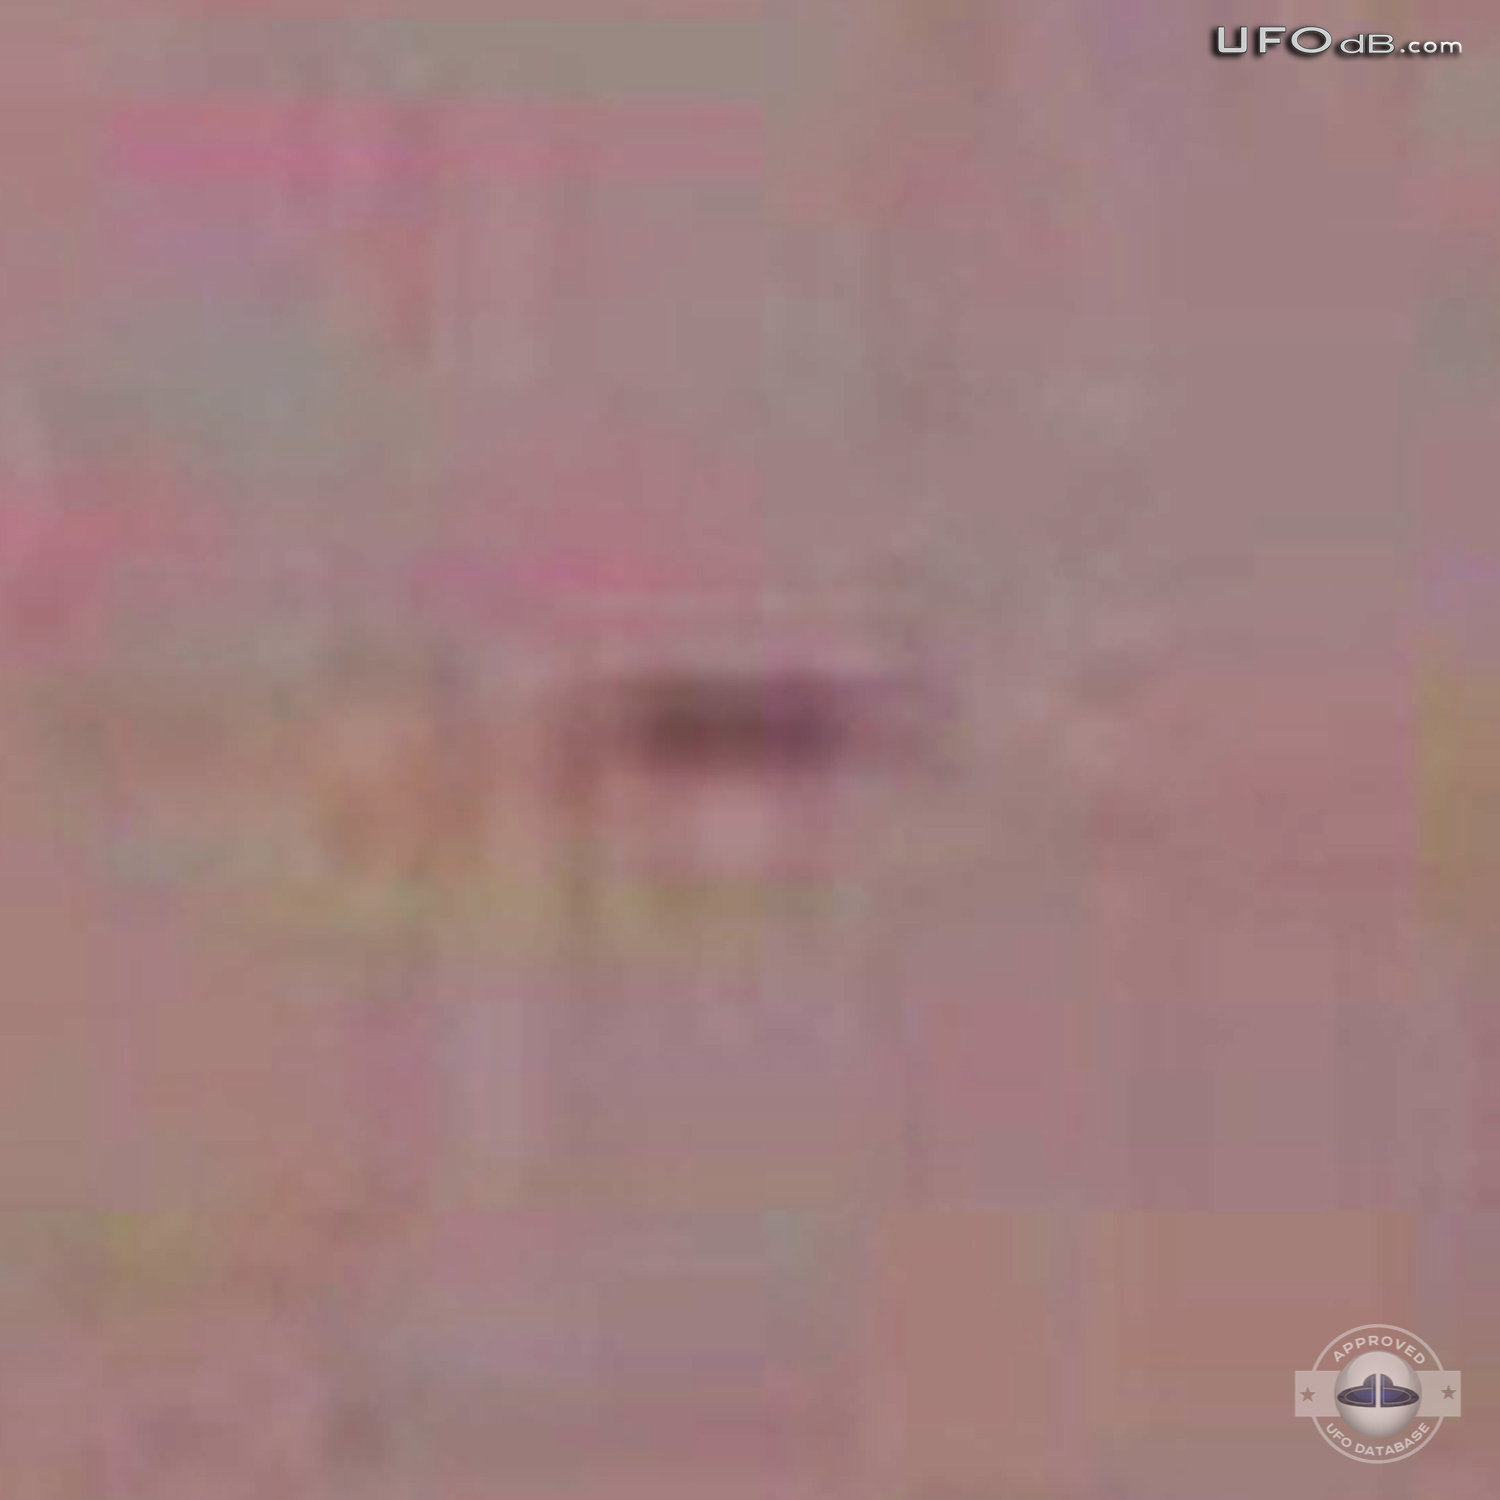 Live cam capture picture of UFO over Vatican city | Italy | May 6 2011 UFO Picture #285-4